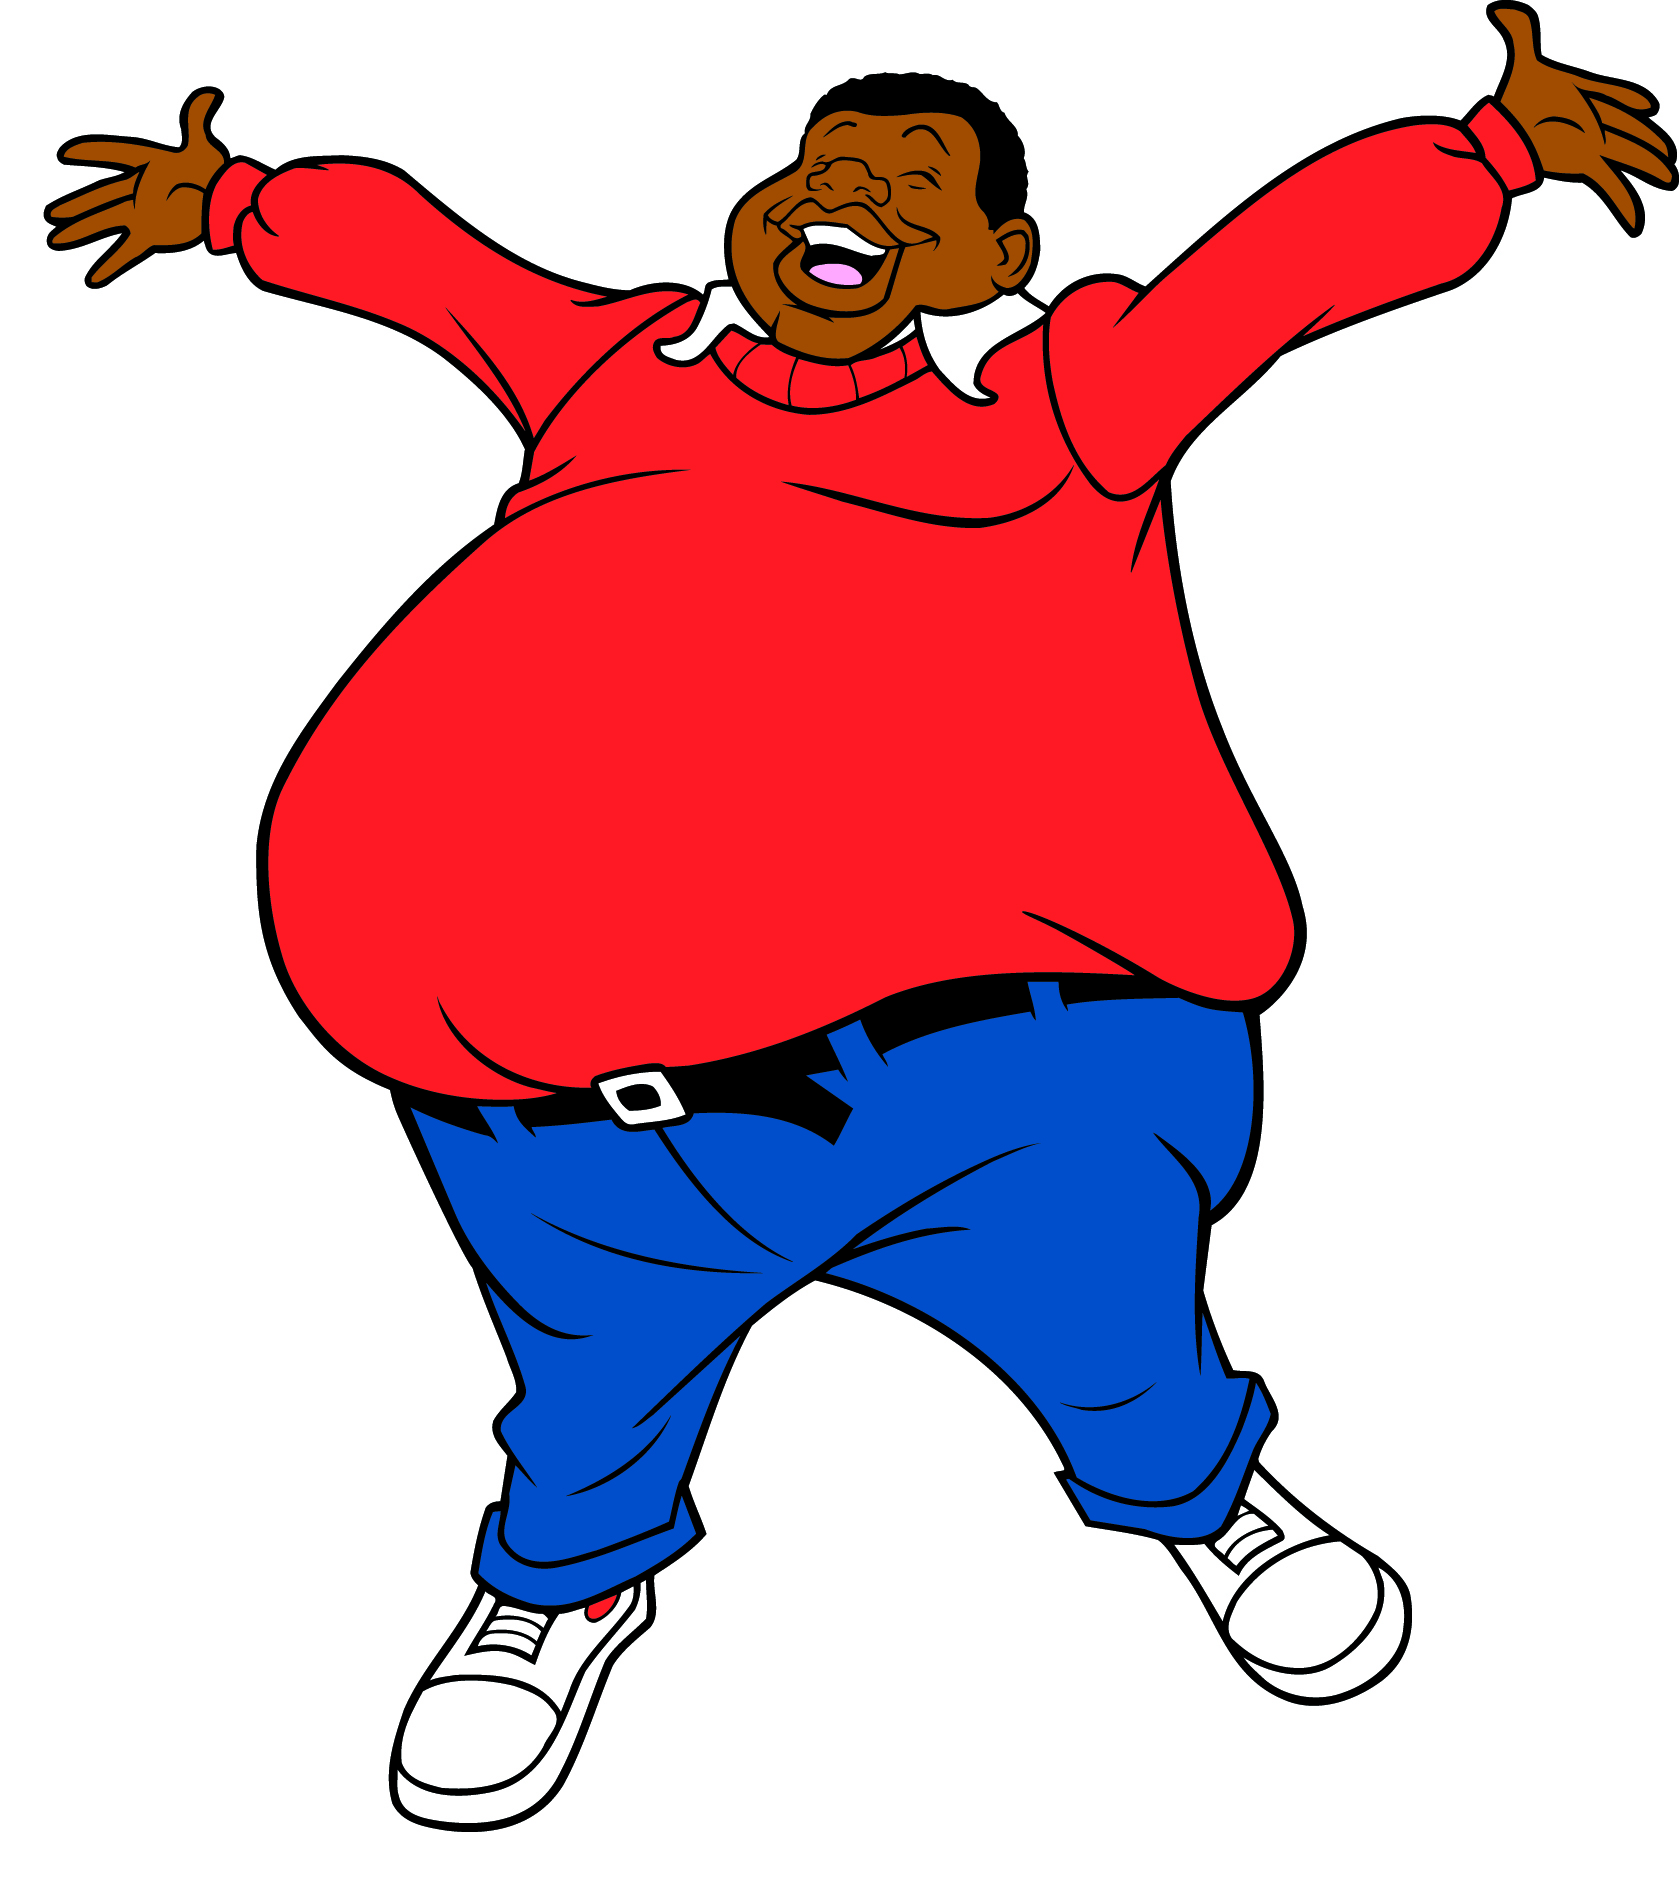 Who Was the Inspiration for Fat Albert? - American Profile